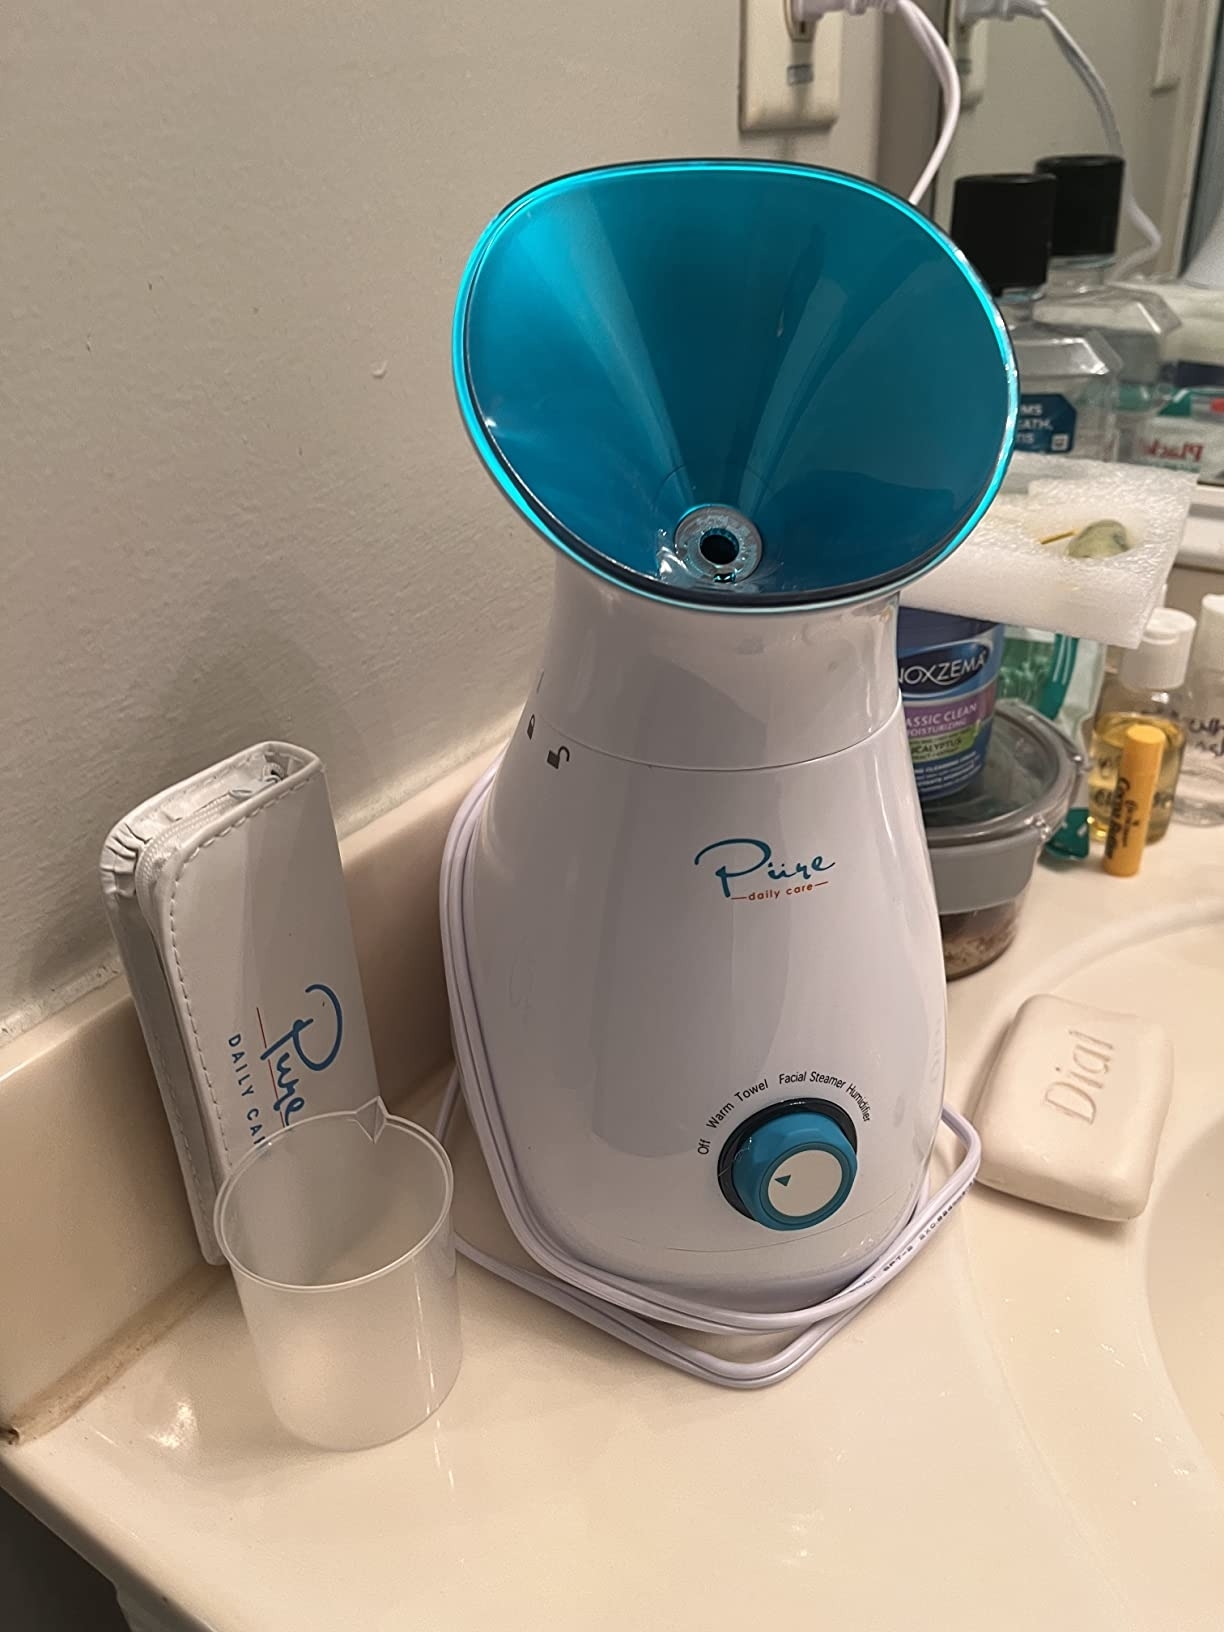 Facial steamer on a bathroom counter next to skincare products for home spa treatments